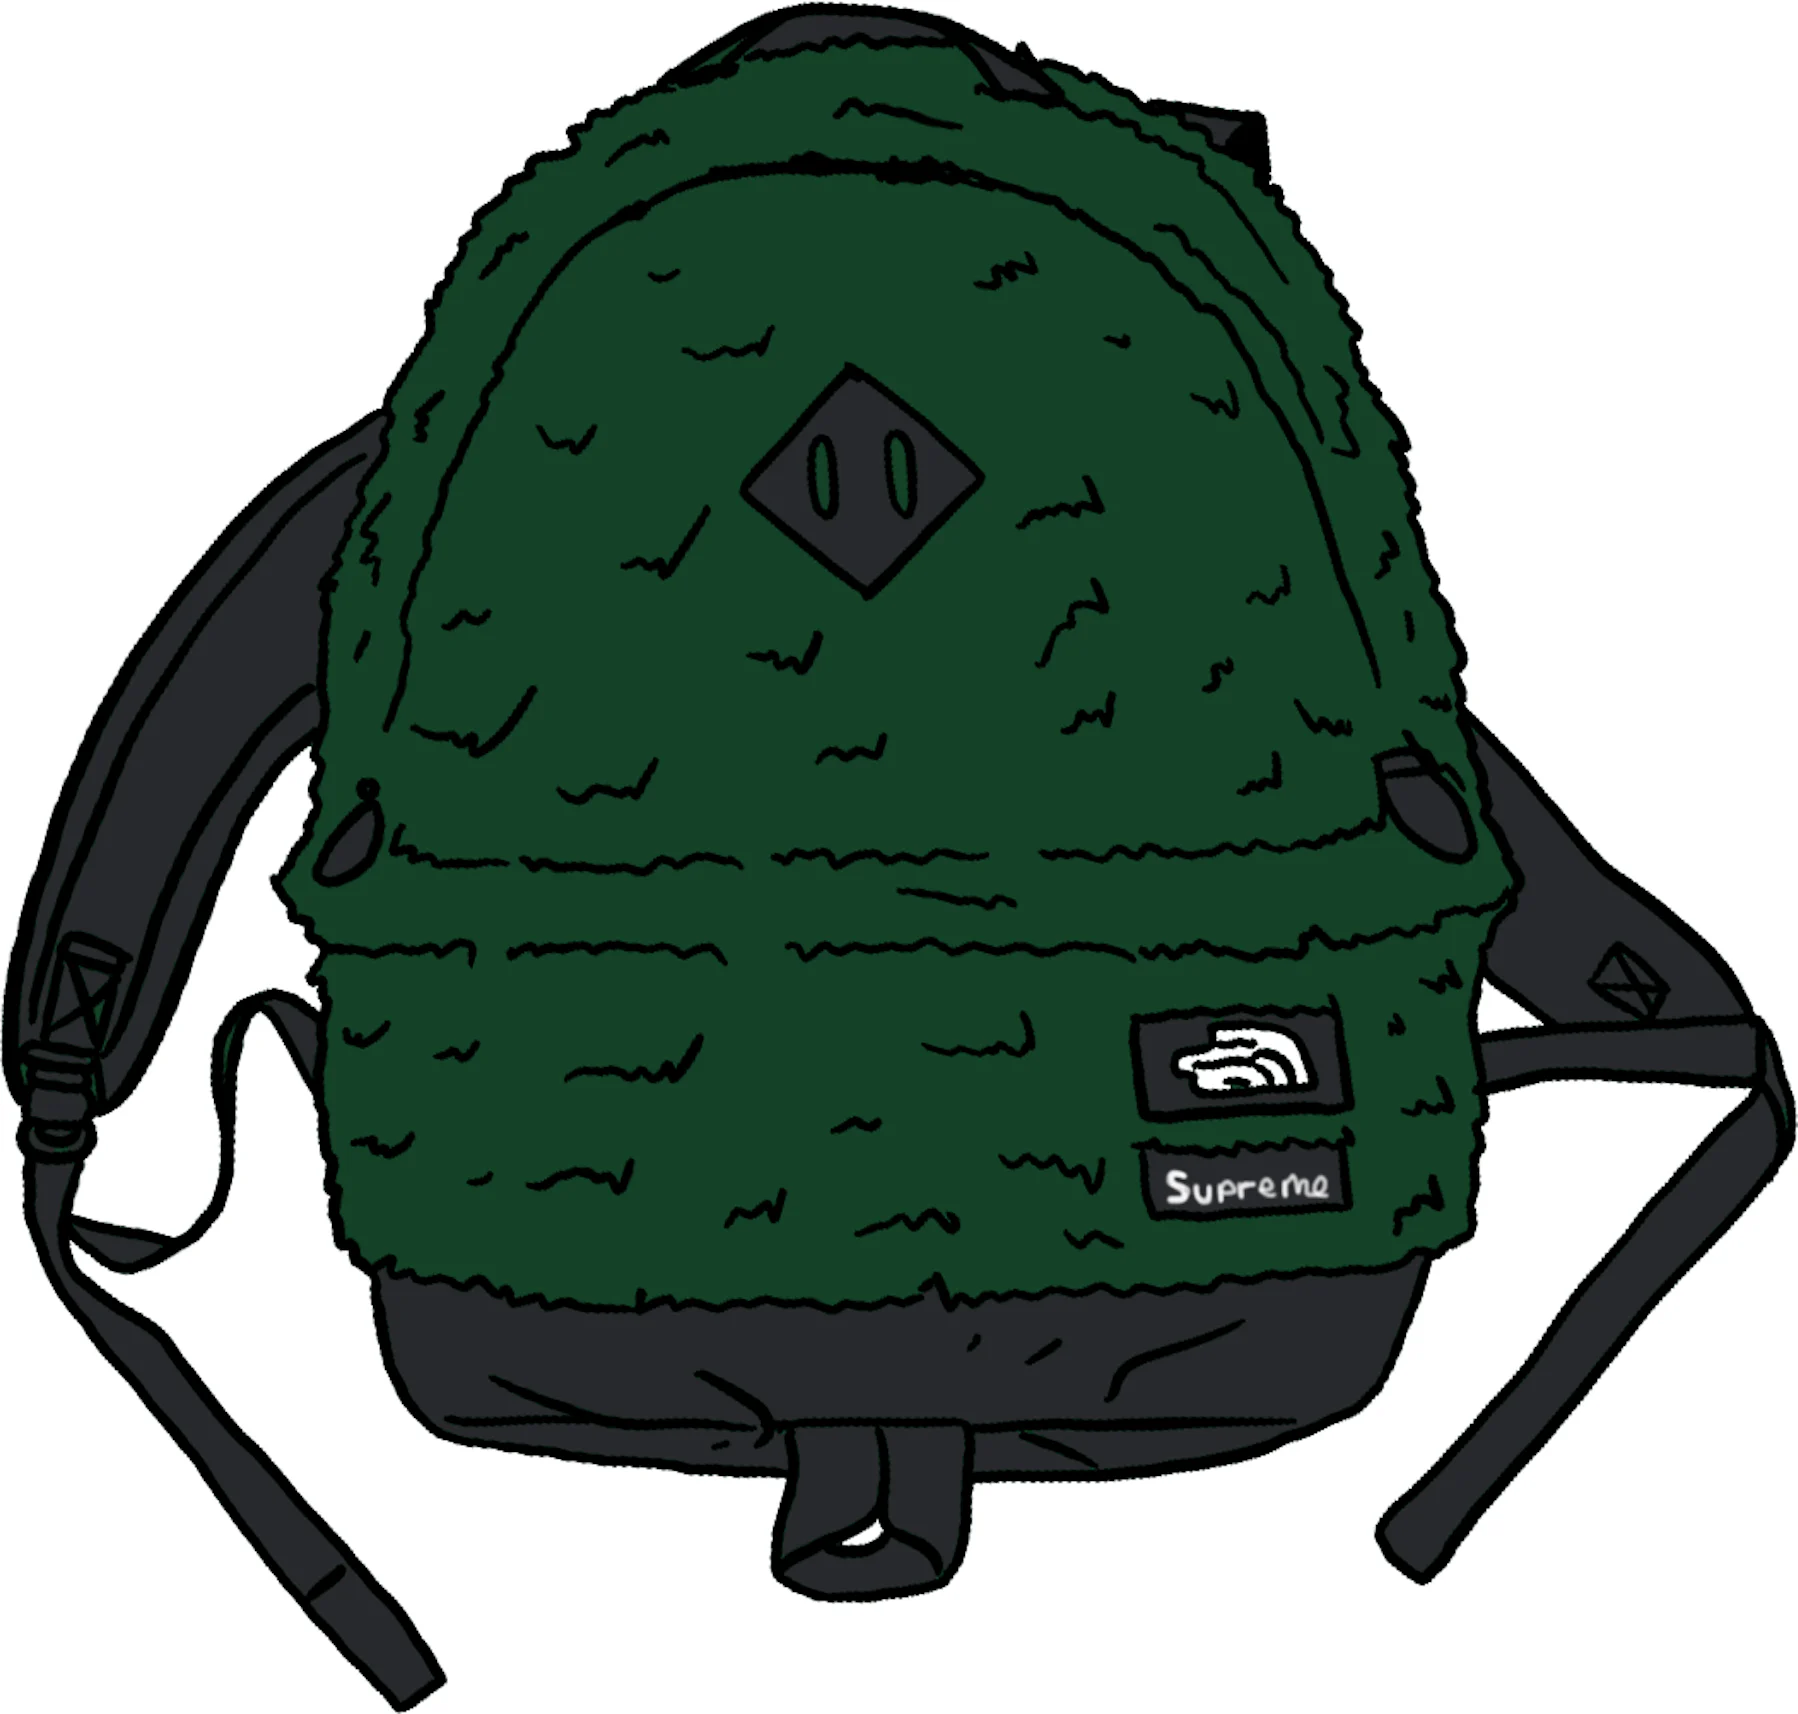 Supreme The North Face Faux Fur Backpack Green